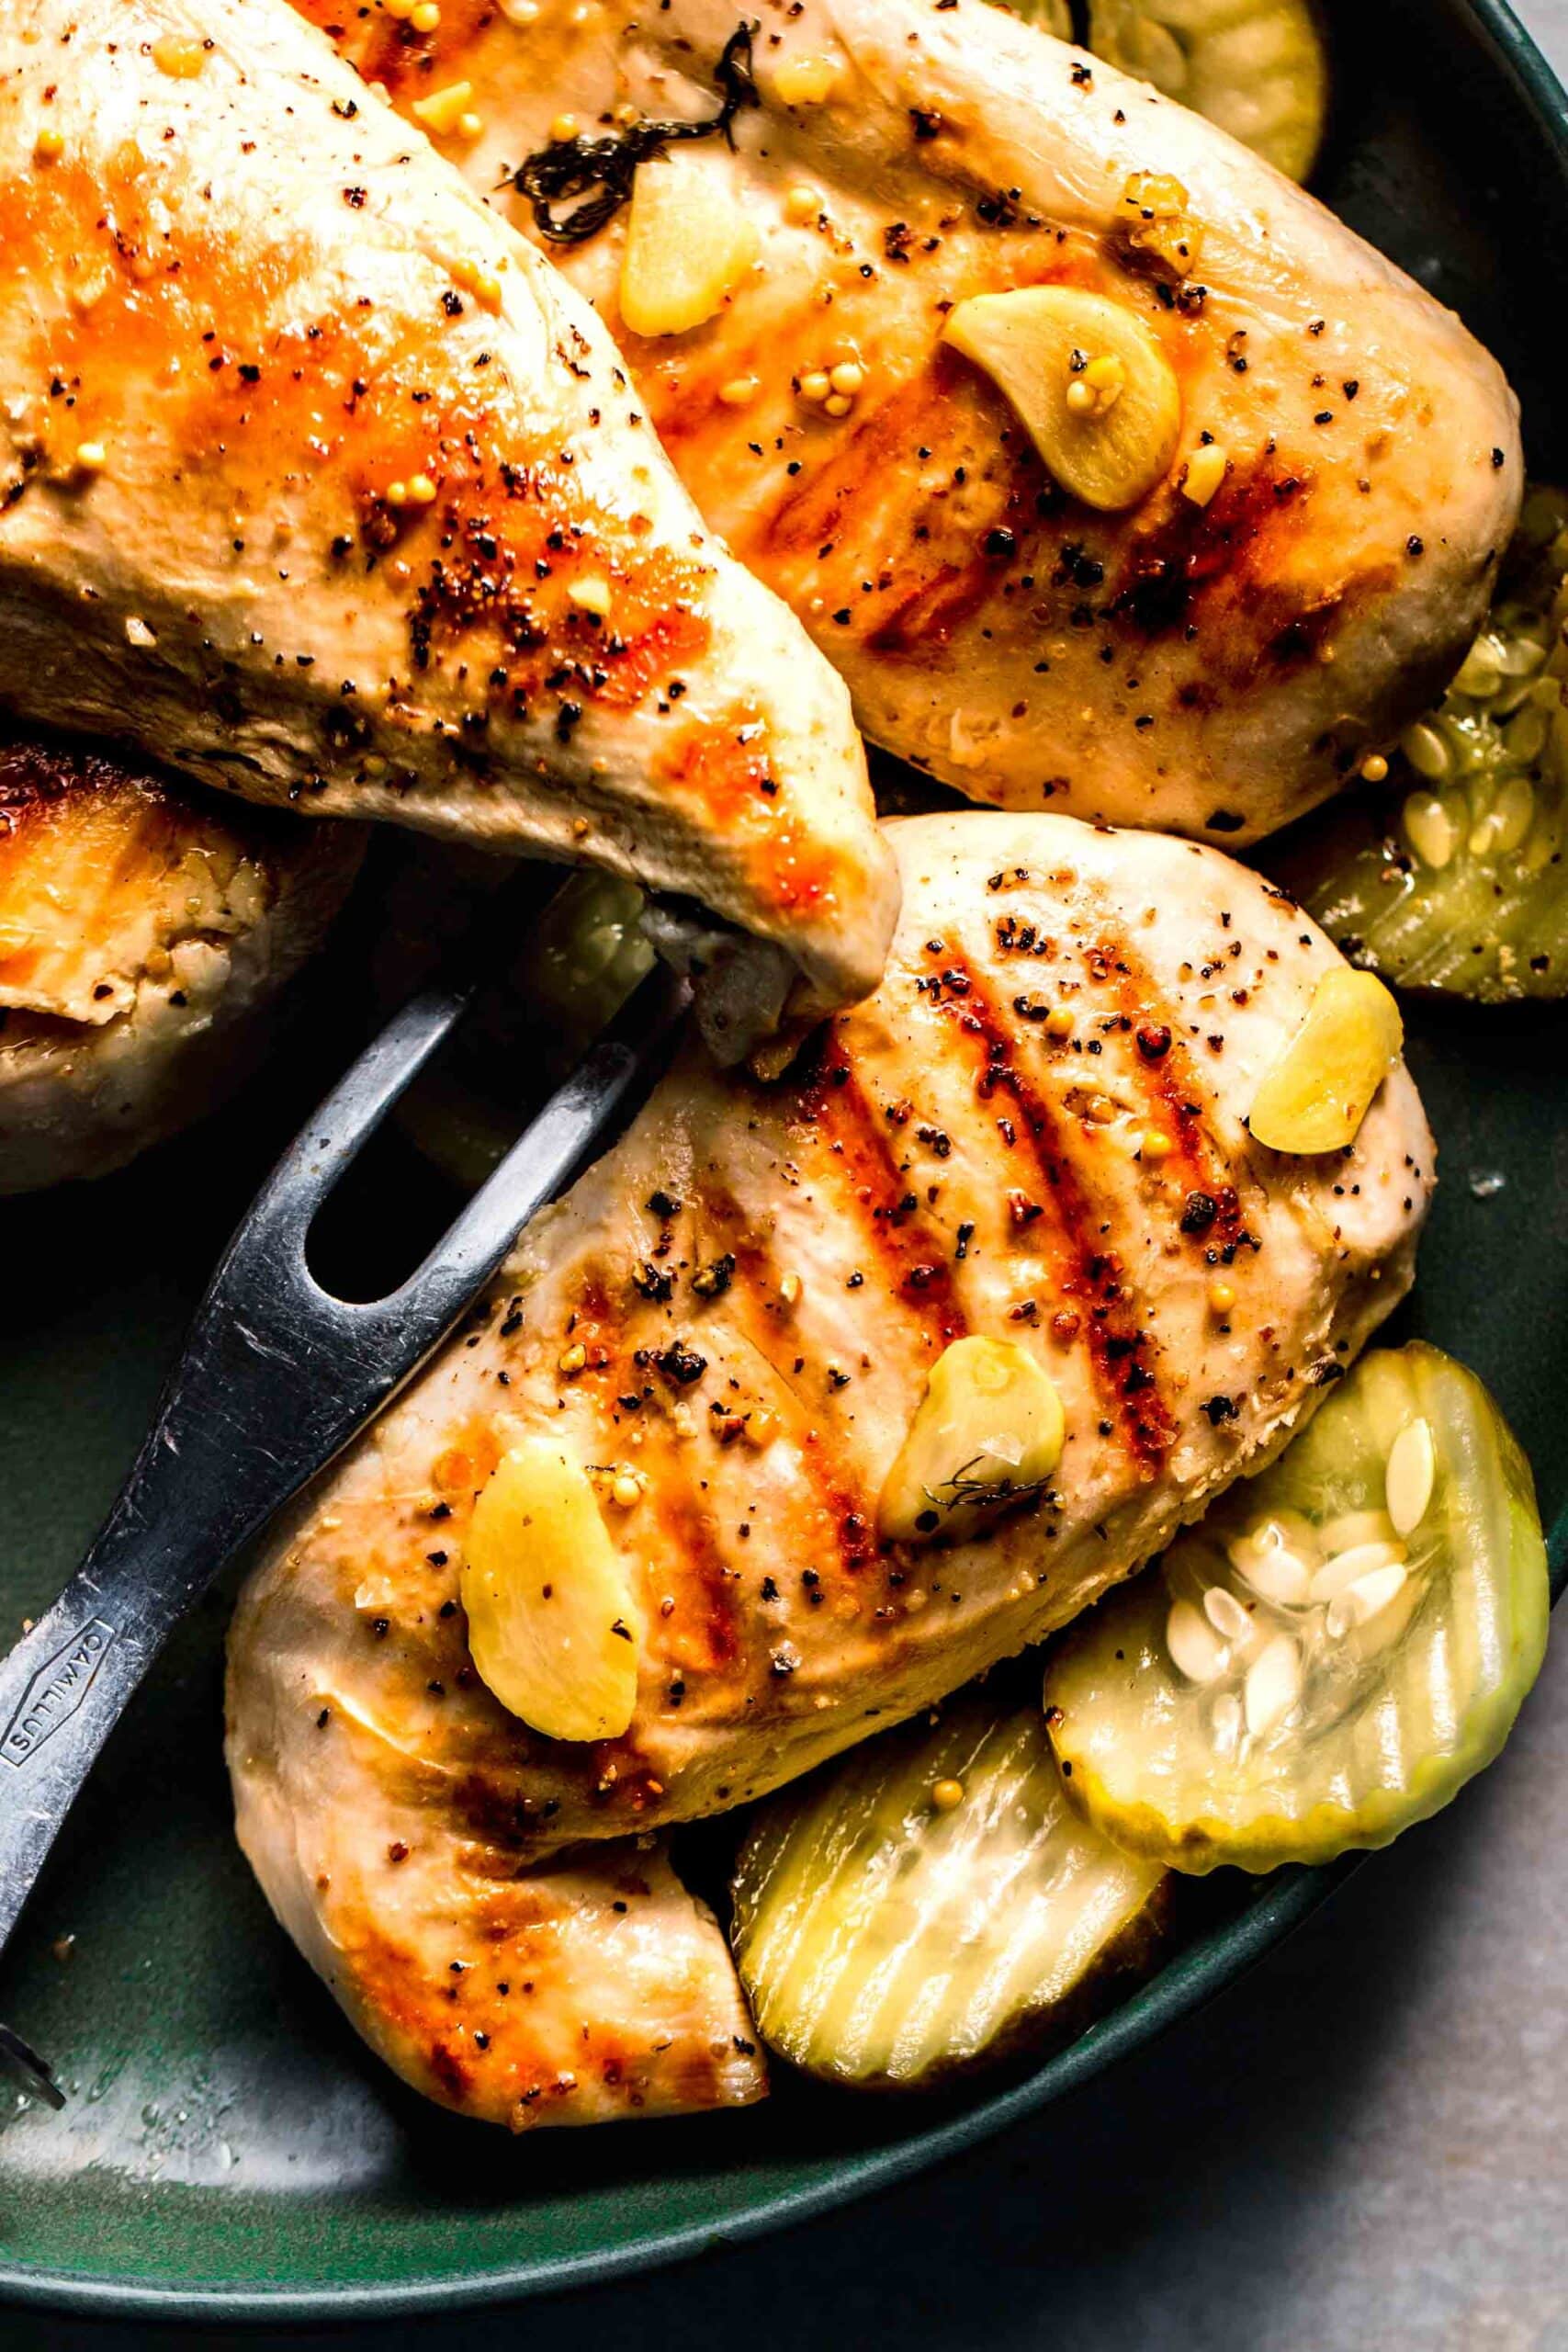 Grilled chicken breast surrounded by pickles.